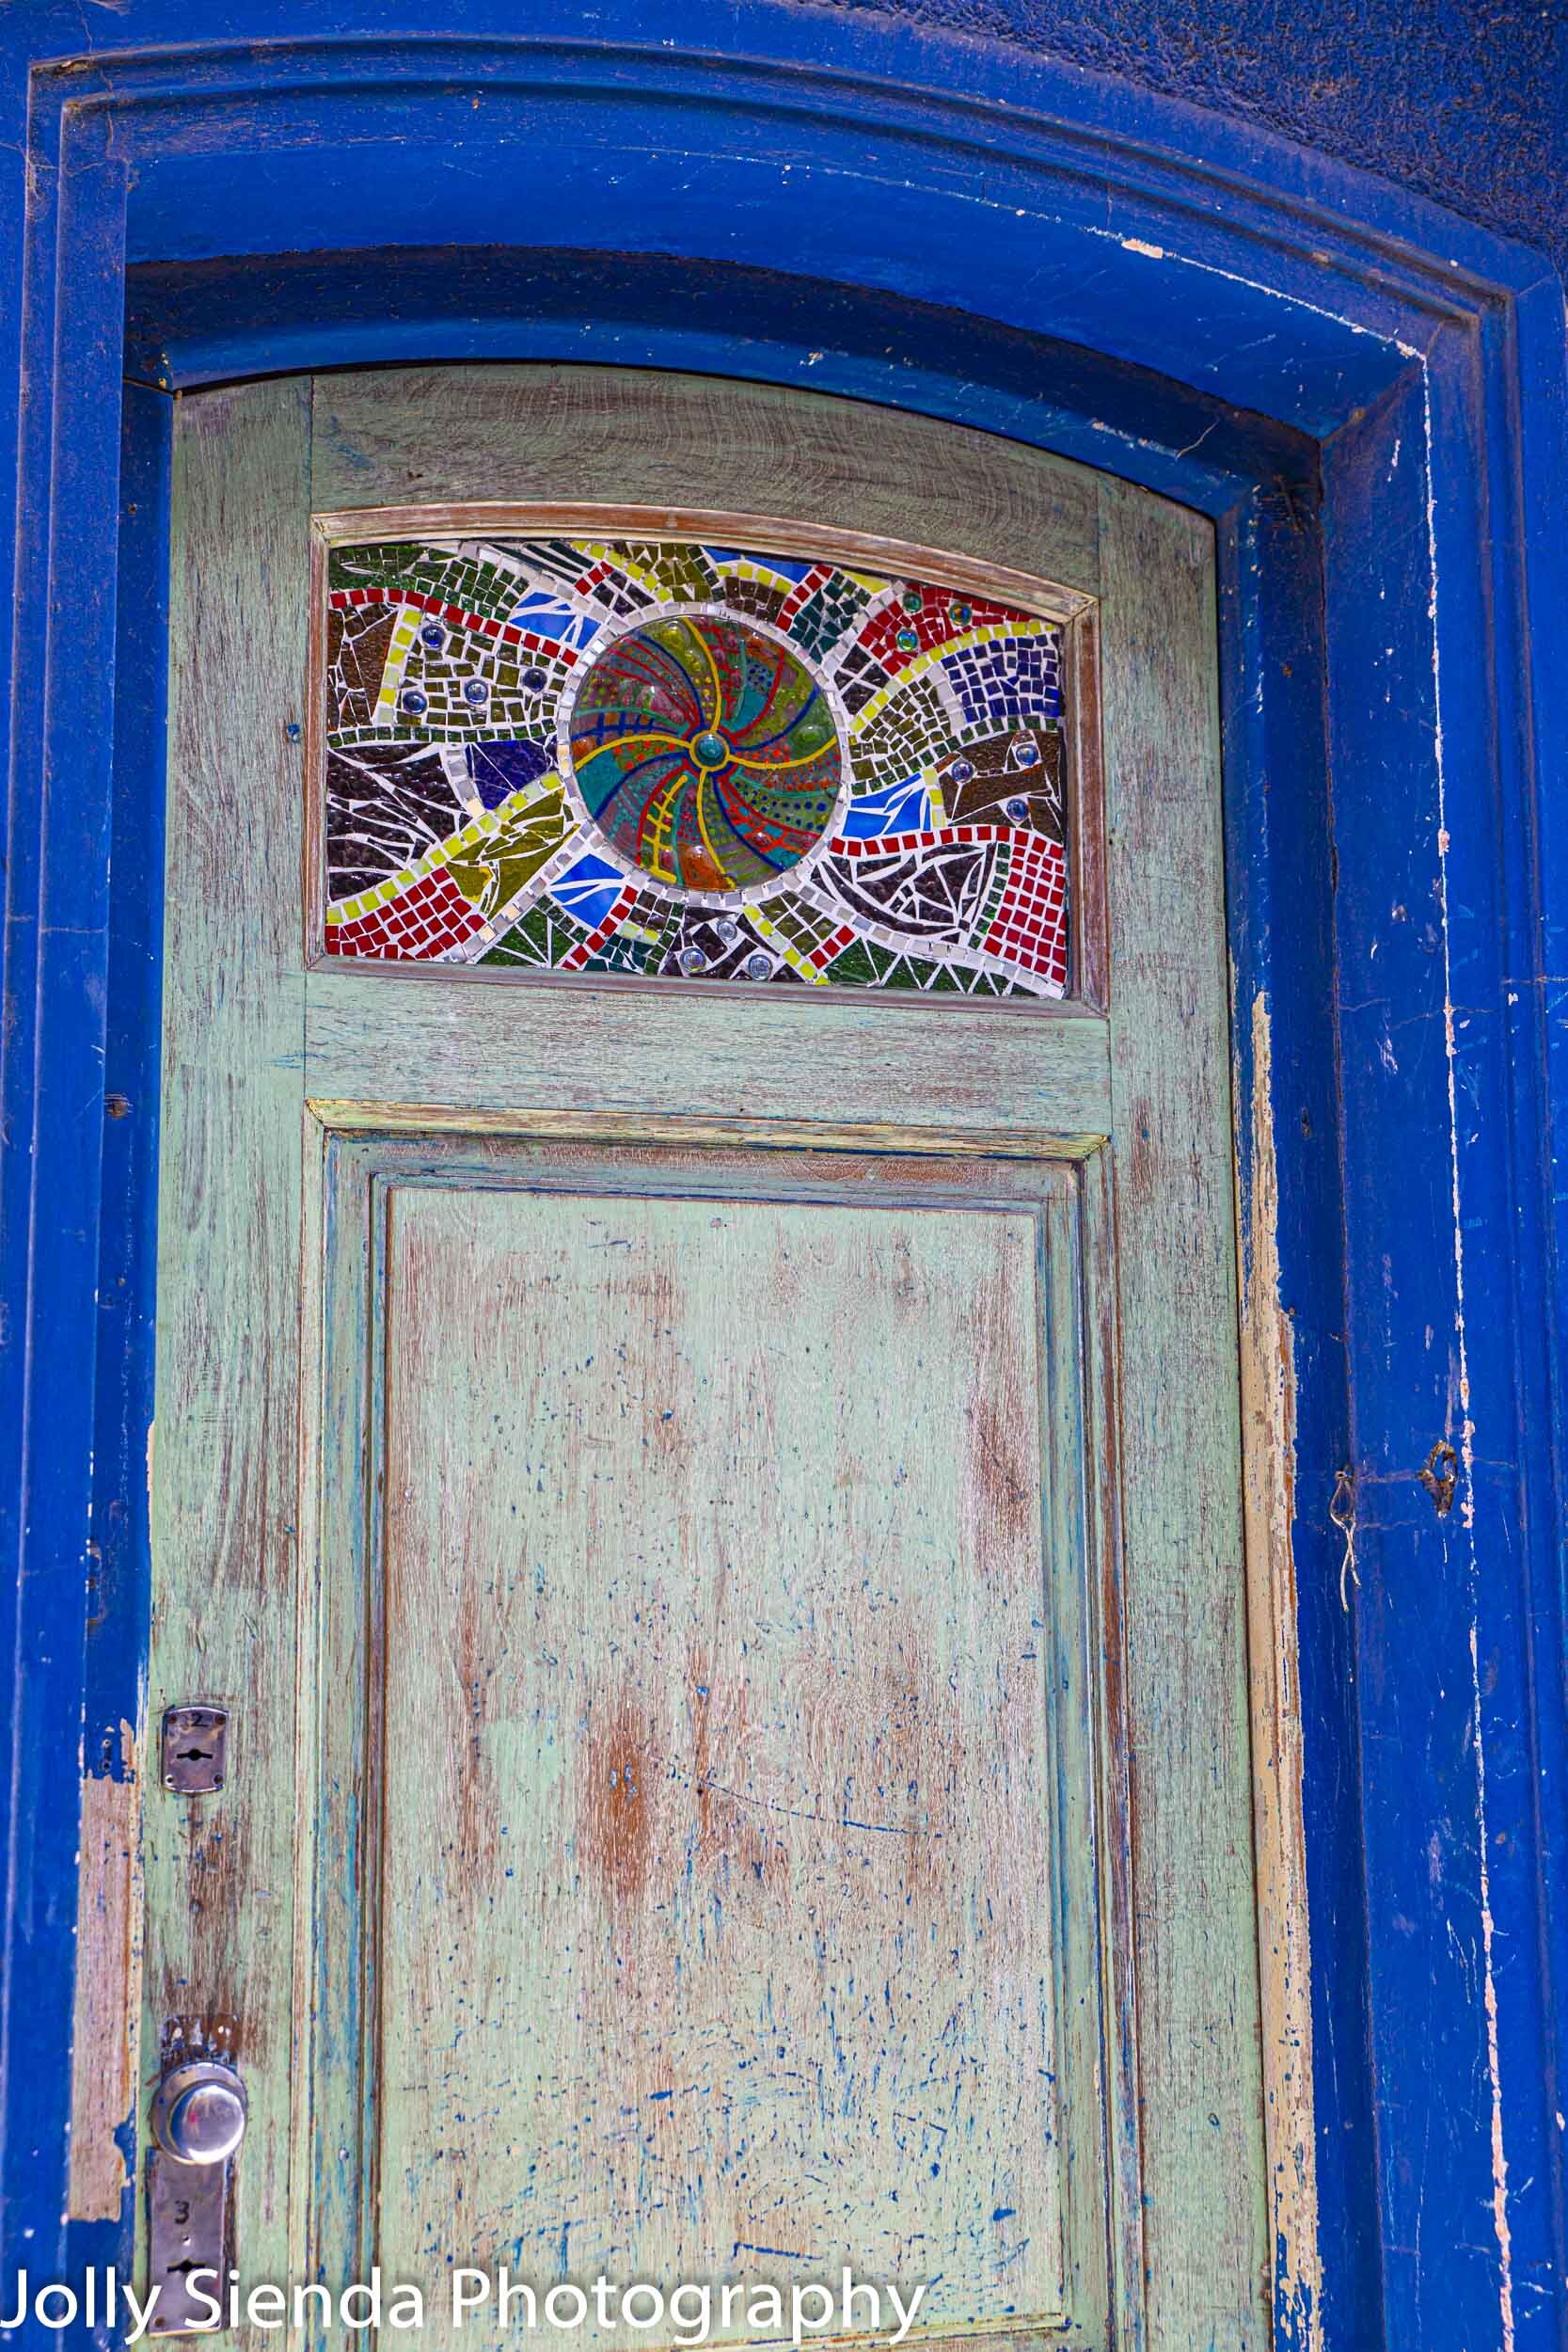 Stained glass window and the blue door